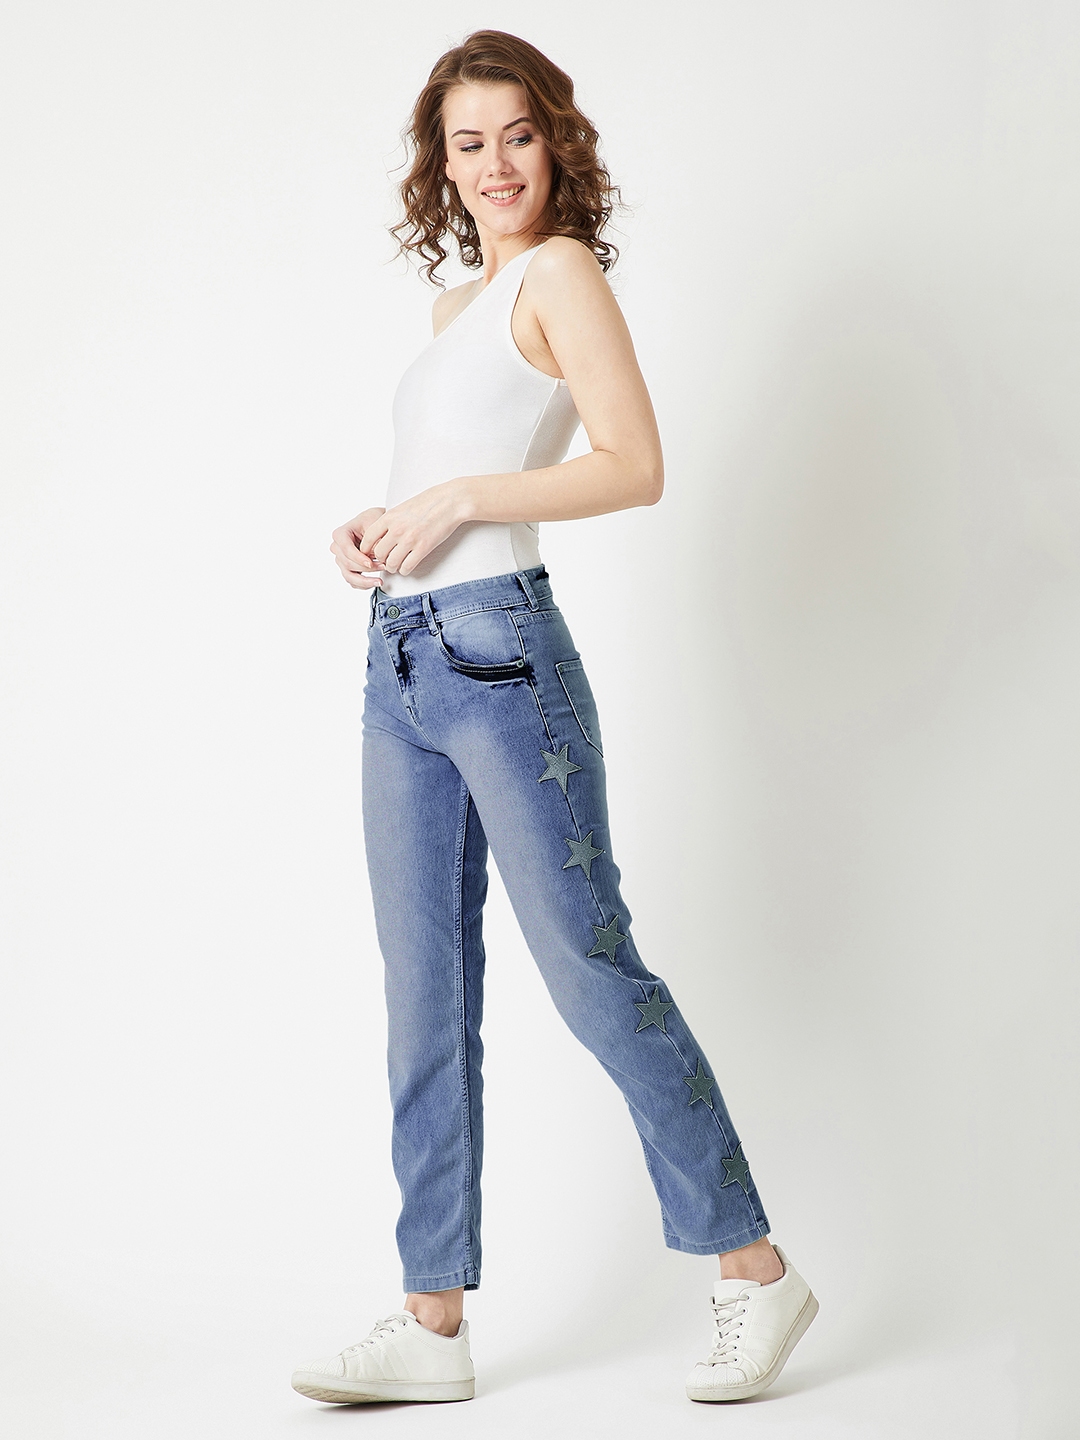 Women's White Solid Bootcut Jeans - MISS CHASE